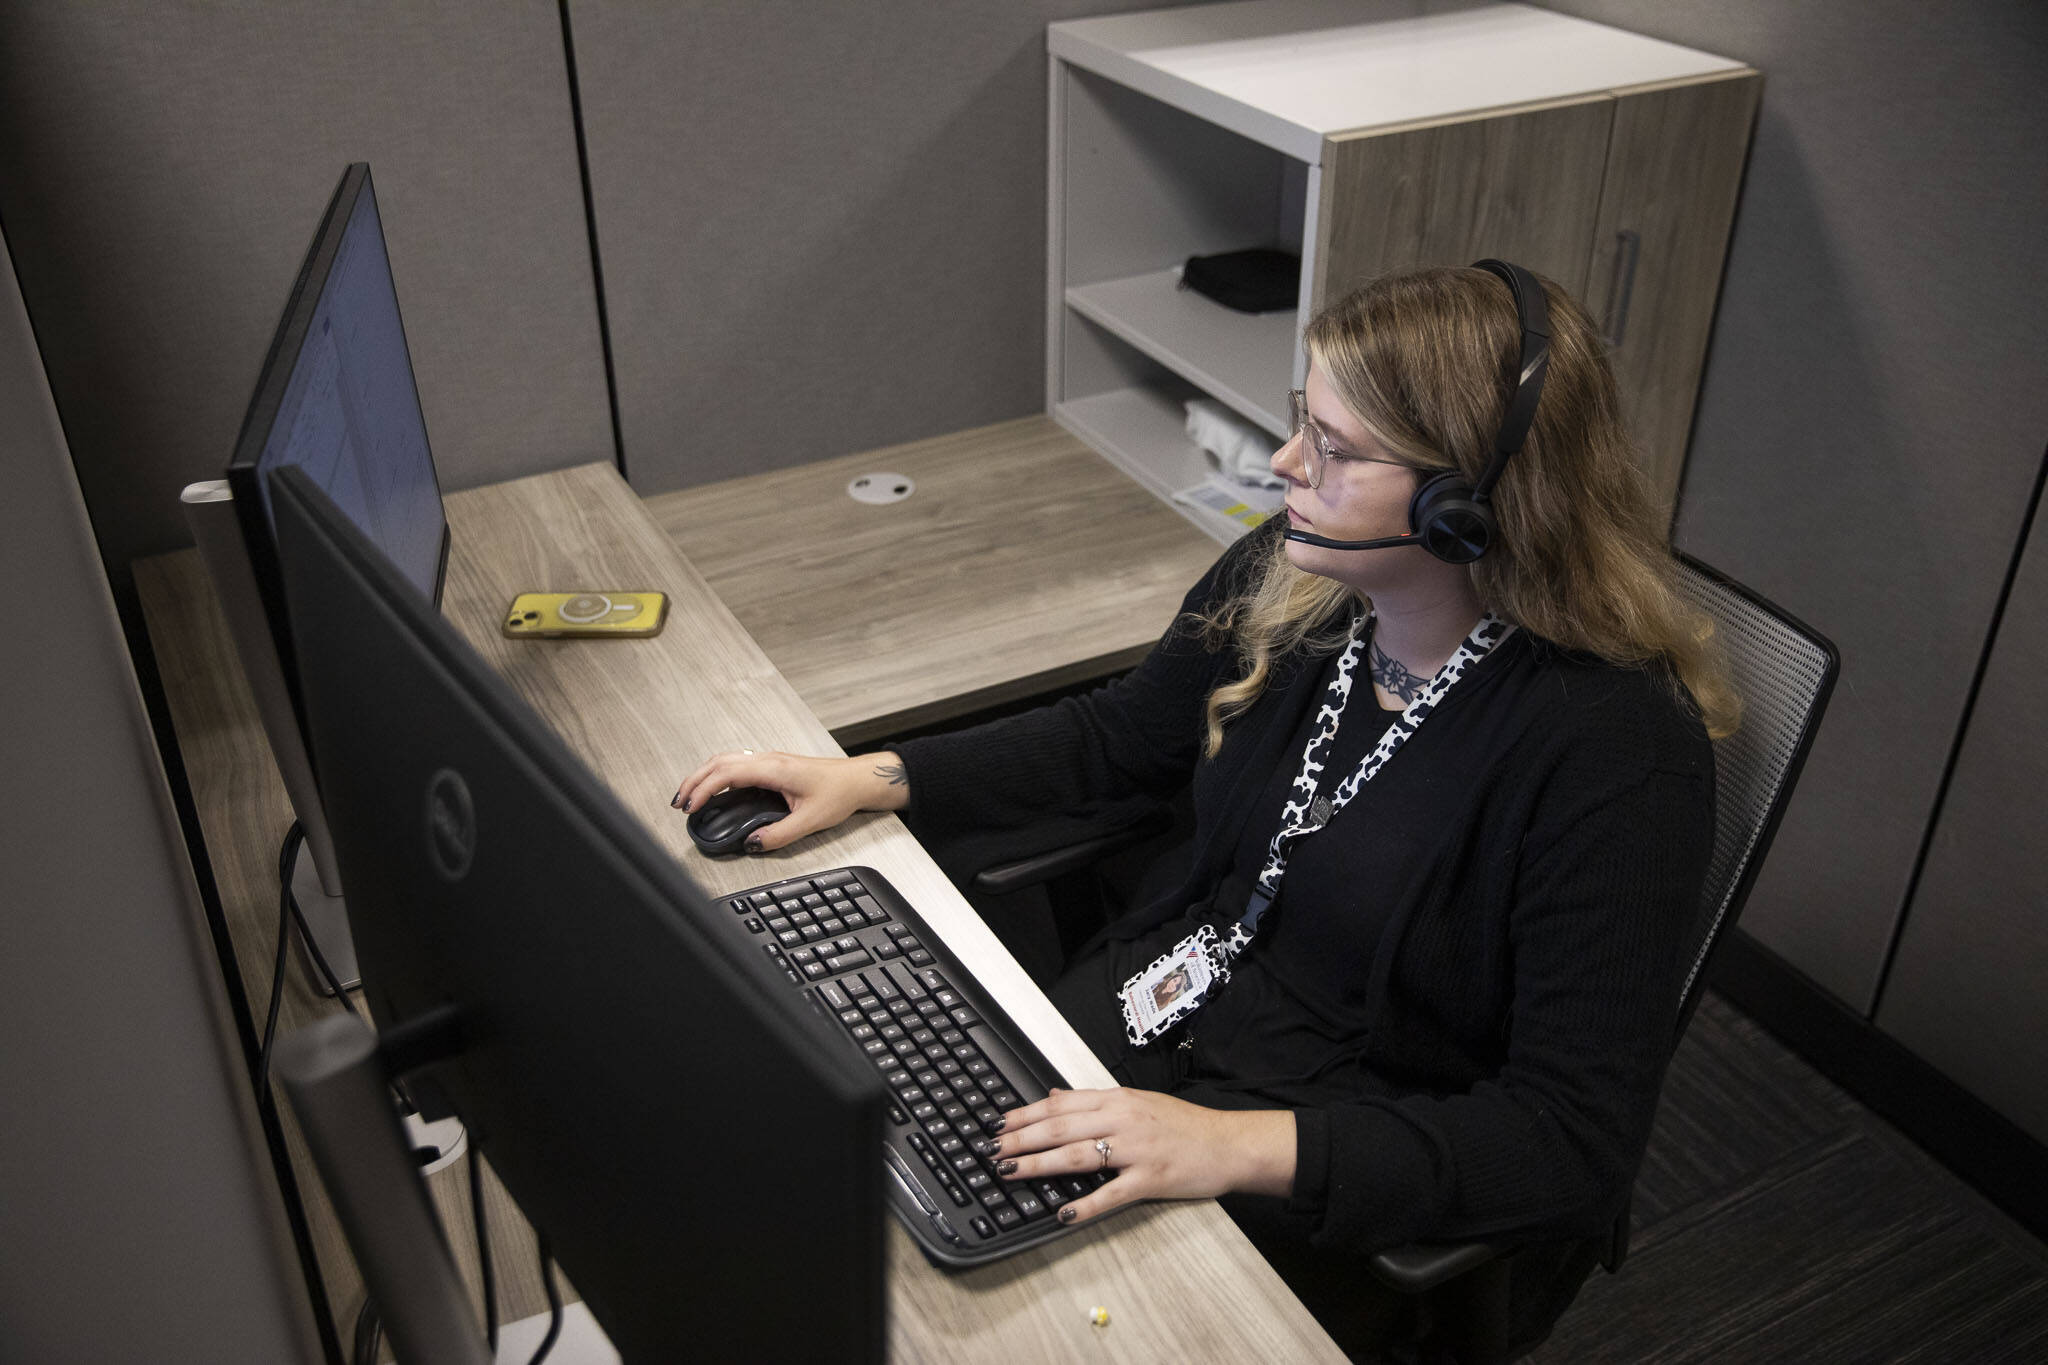 Jacy Wade, a 988 crisis counselor, talks to caller during her shift on Friday, Oct. 6, 2023 in Everett, Washington. (Olivia Vanni / The Herald)